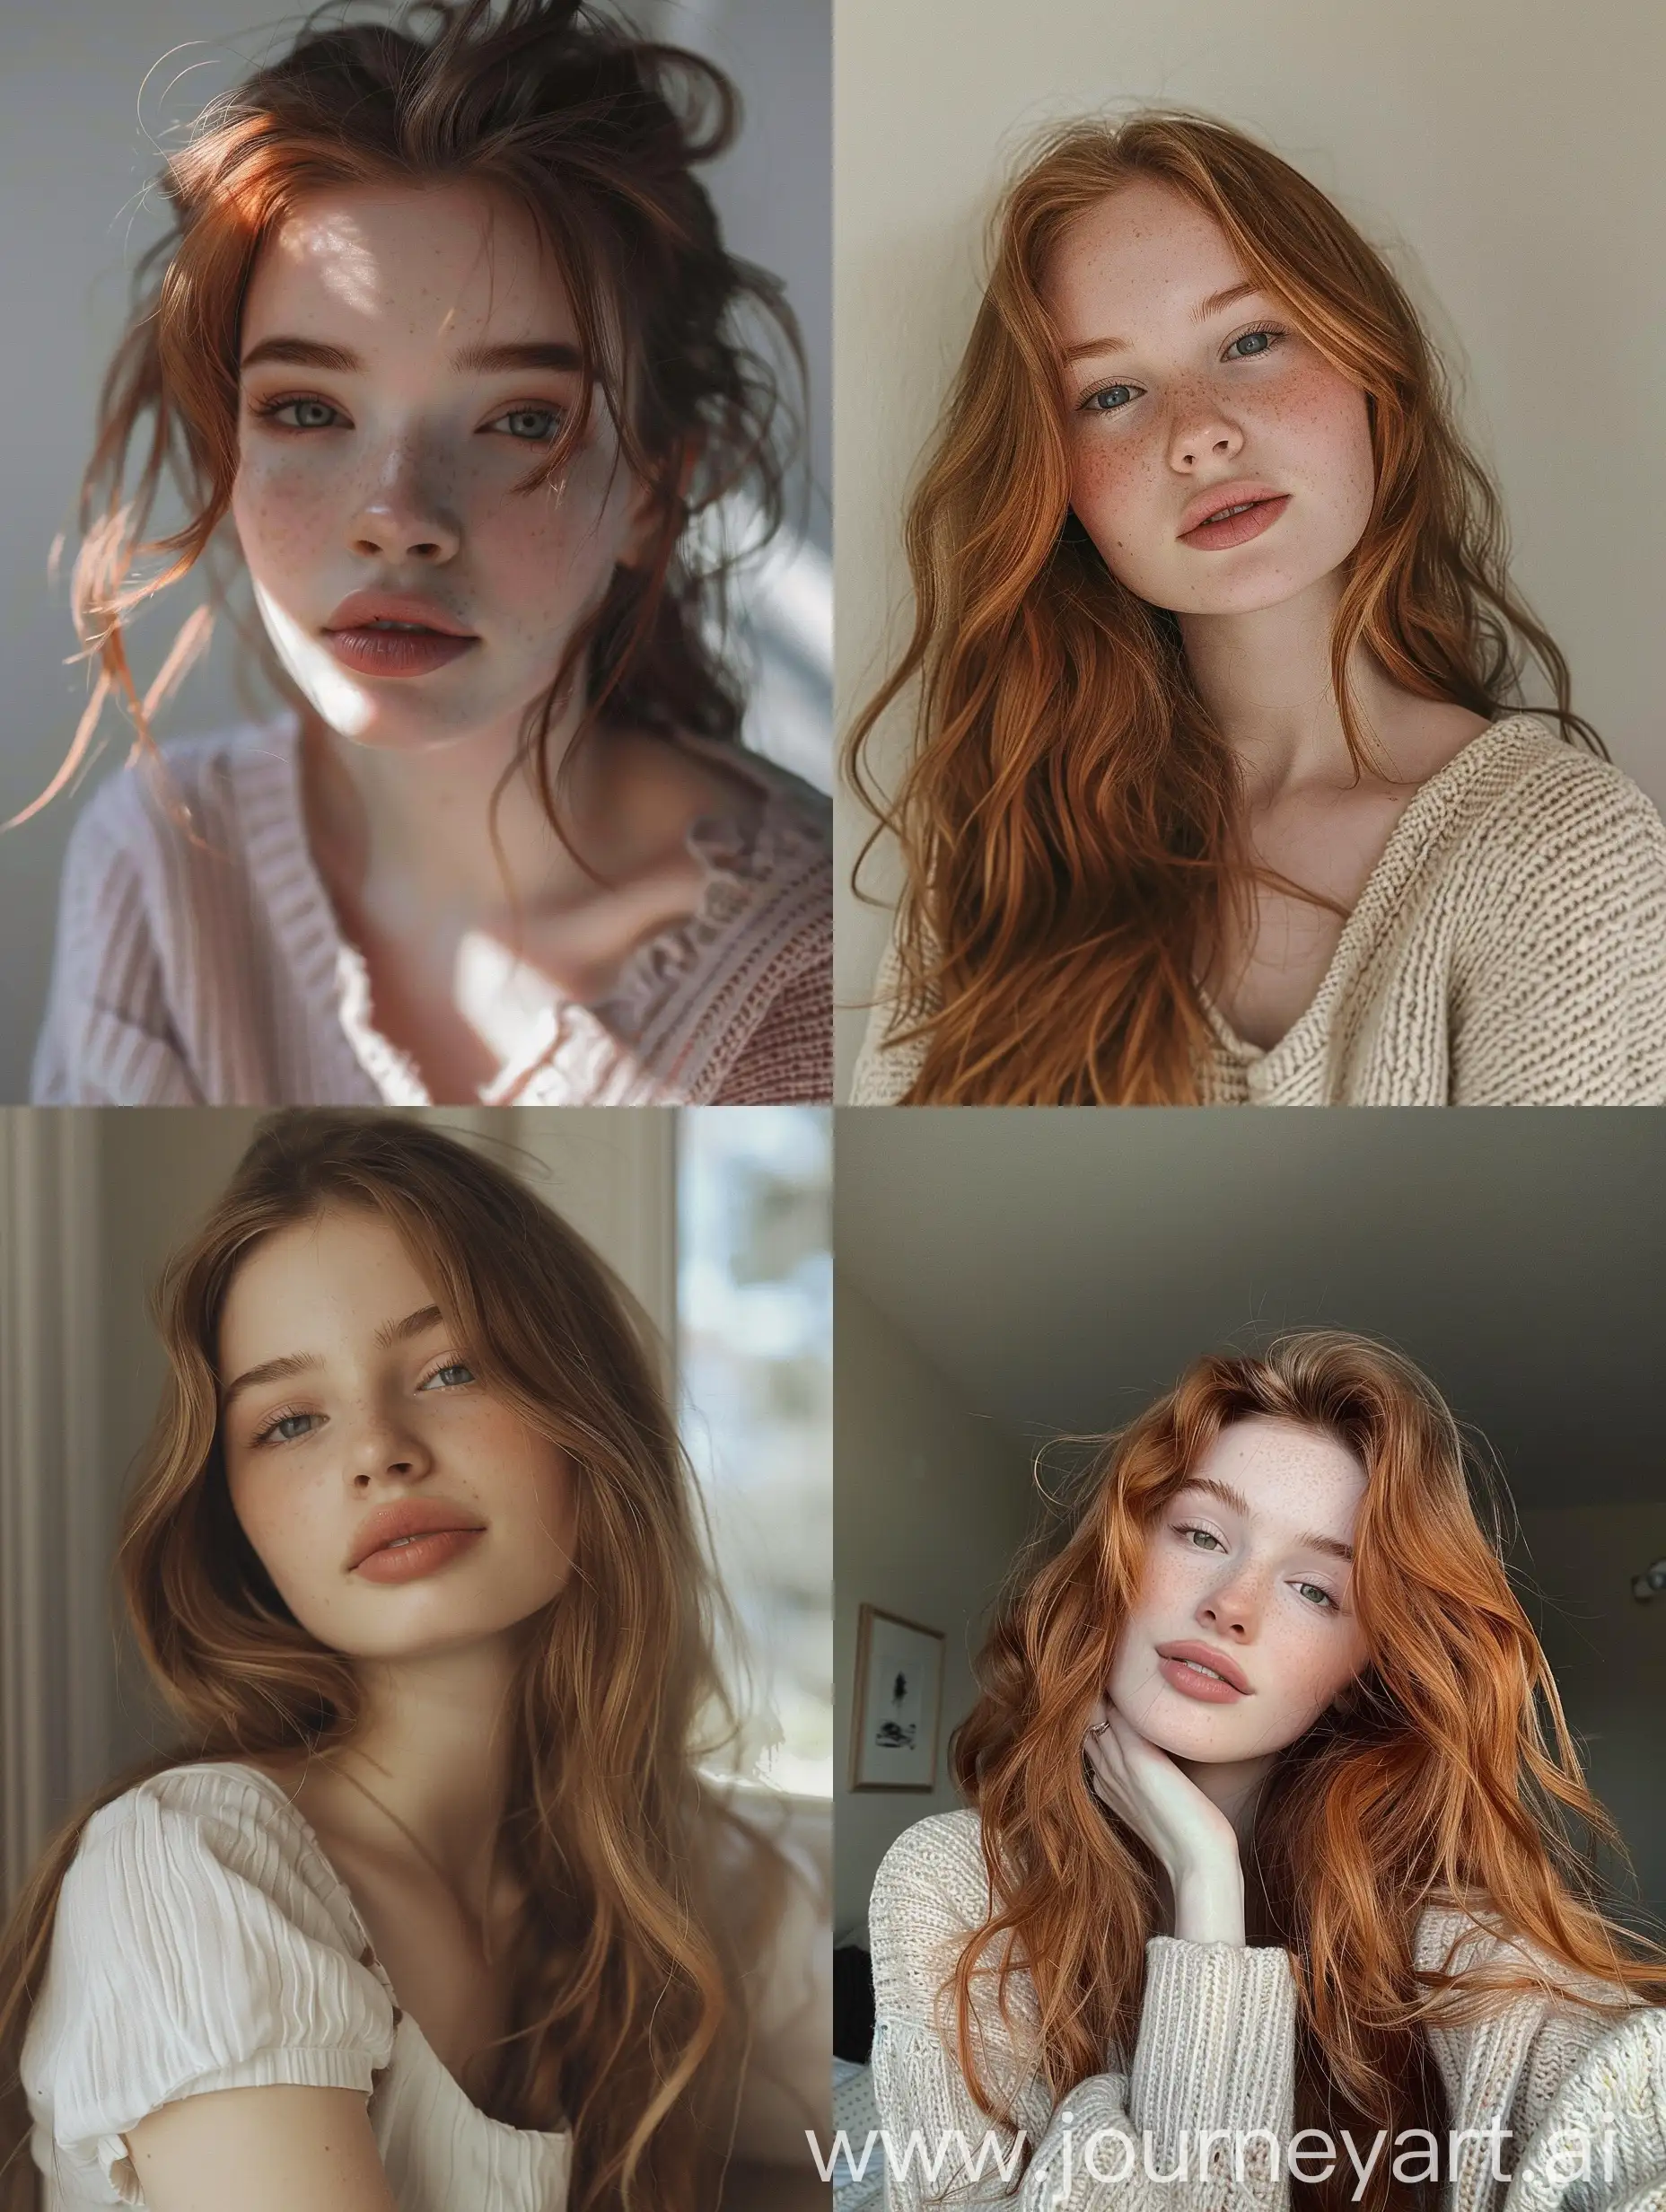 Homemade photo,  low res, normal aesthetic, a casual photo of everyday life, a girl with natural beauty, looks like Ellie Bamber, with a candid smirk and a sweet look